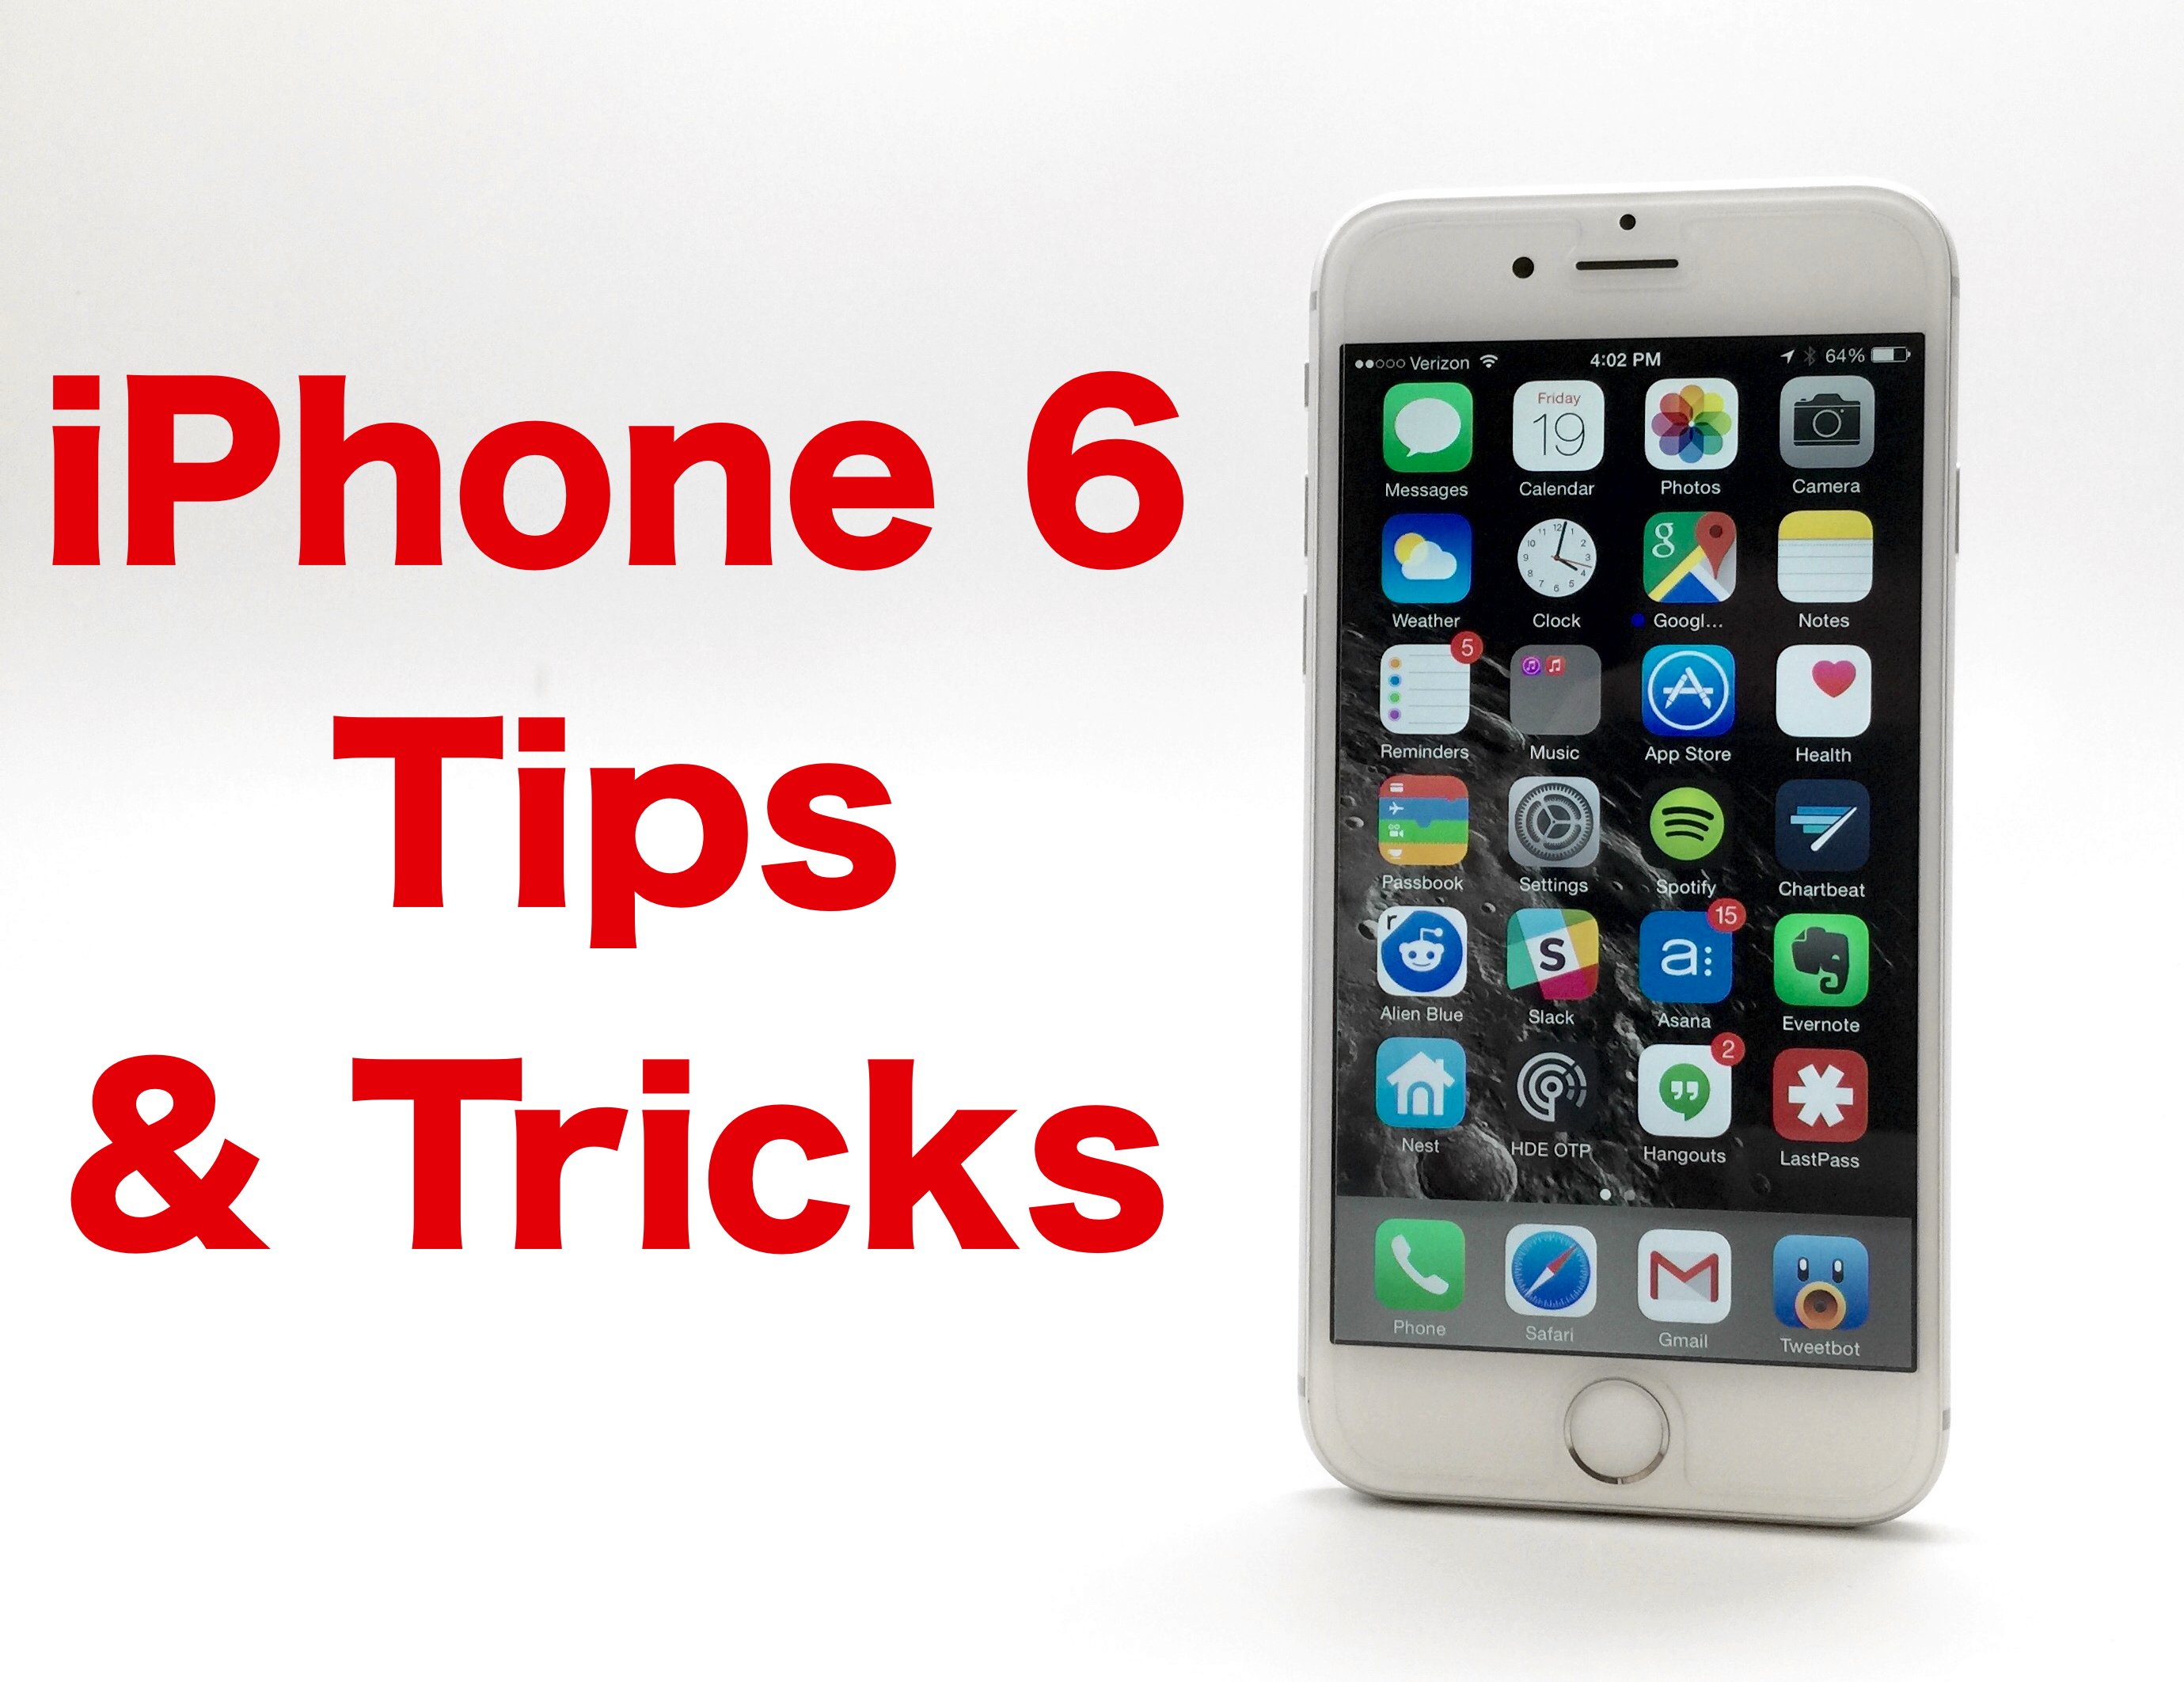 Master your new iPhone with these iPhone 6 tips & tricks.